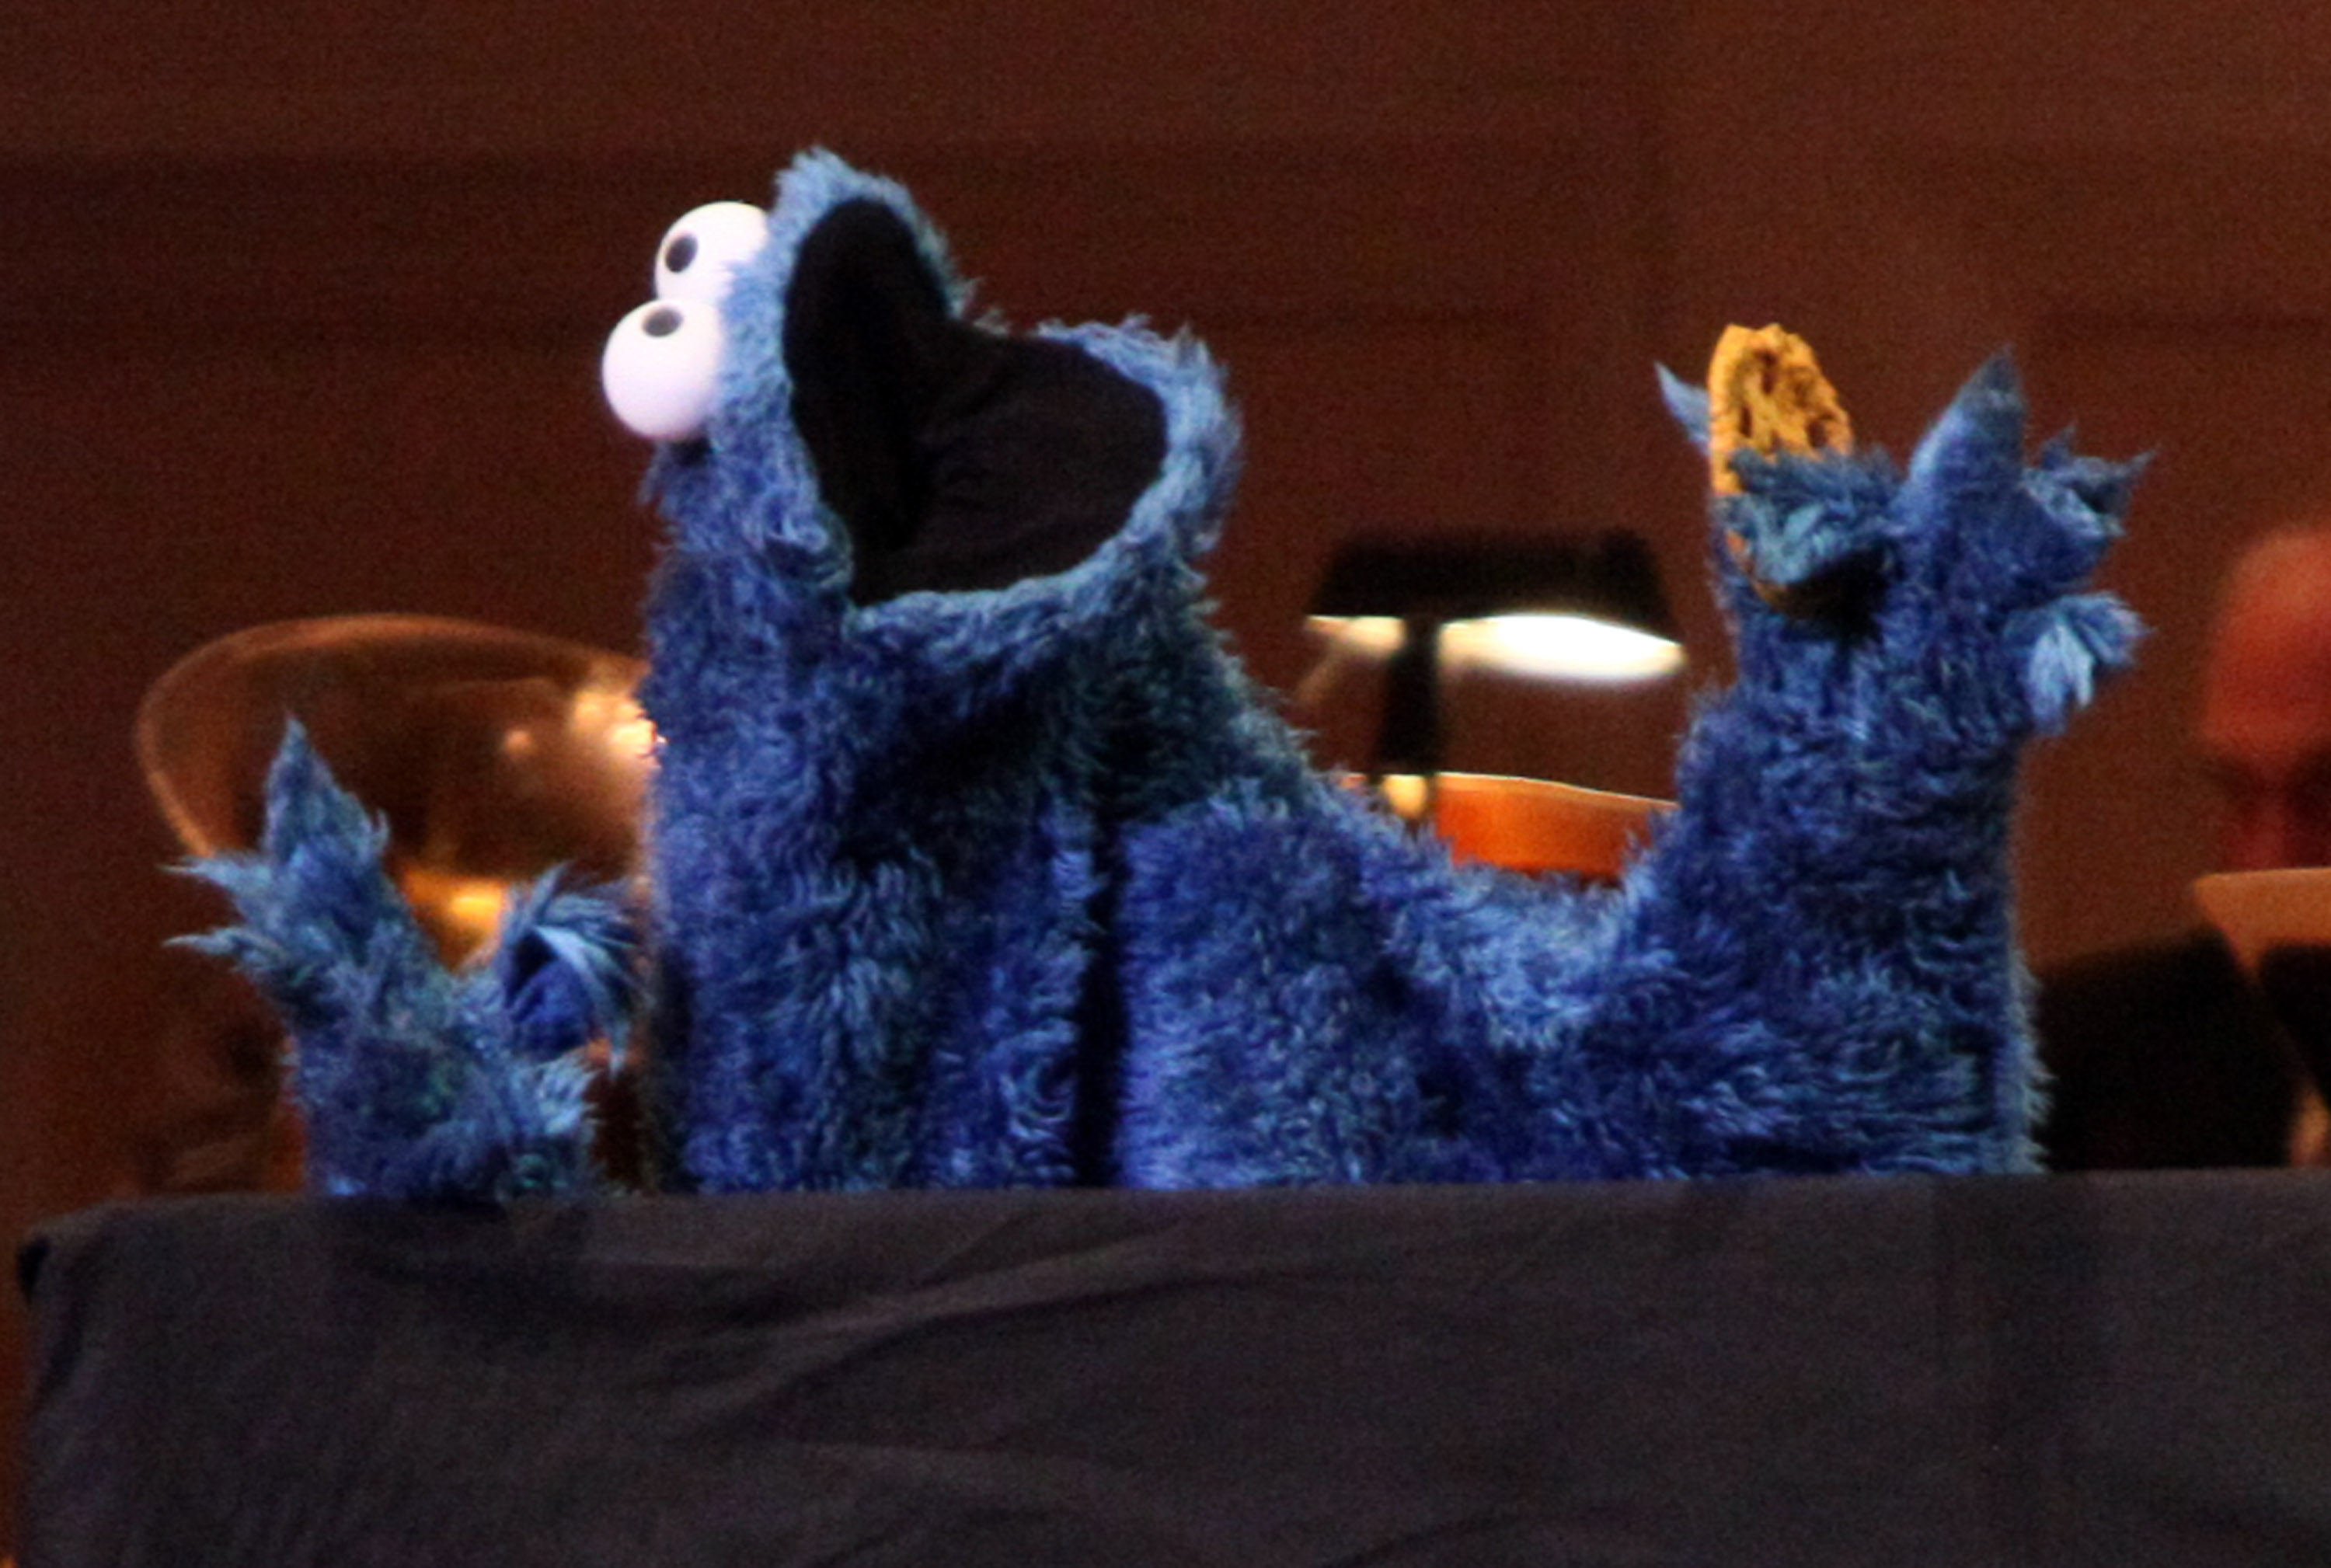 Cookie Monster performs during The New York Pops Present "Jim Henson's Musical World" at Carnegie Hall on April 14, 2012 in New York City. (Paul Zimmerman&mdash;Getty Images)